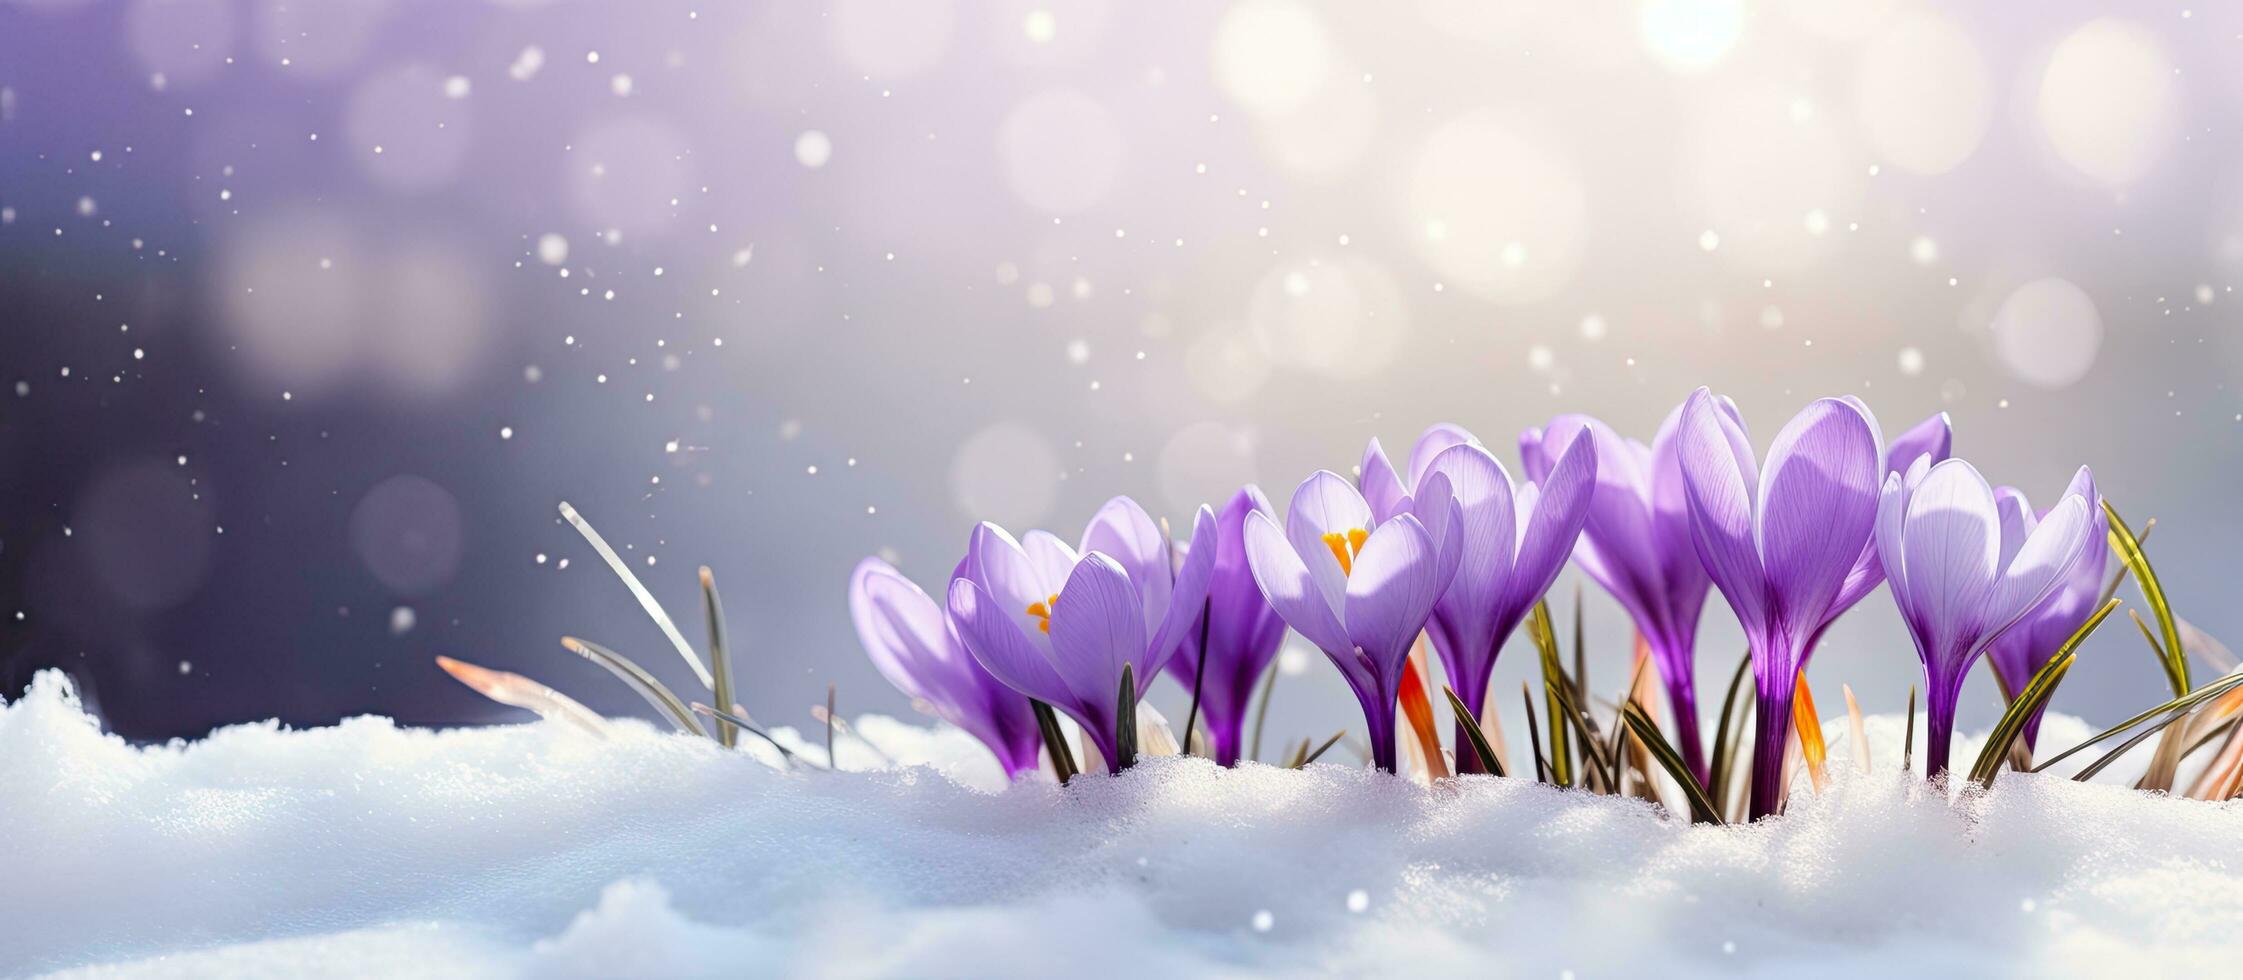 Purple crocuses emerging from under snow in early spring closeup with room for text photo